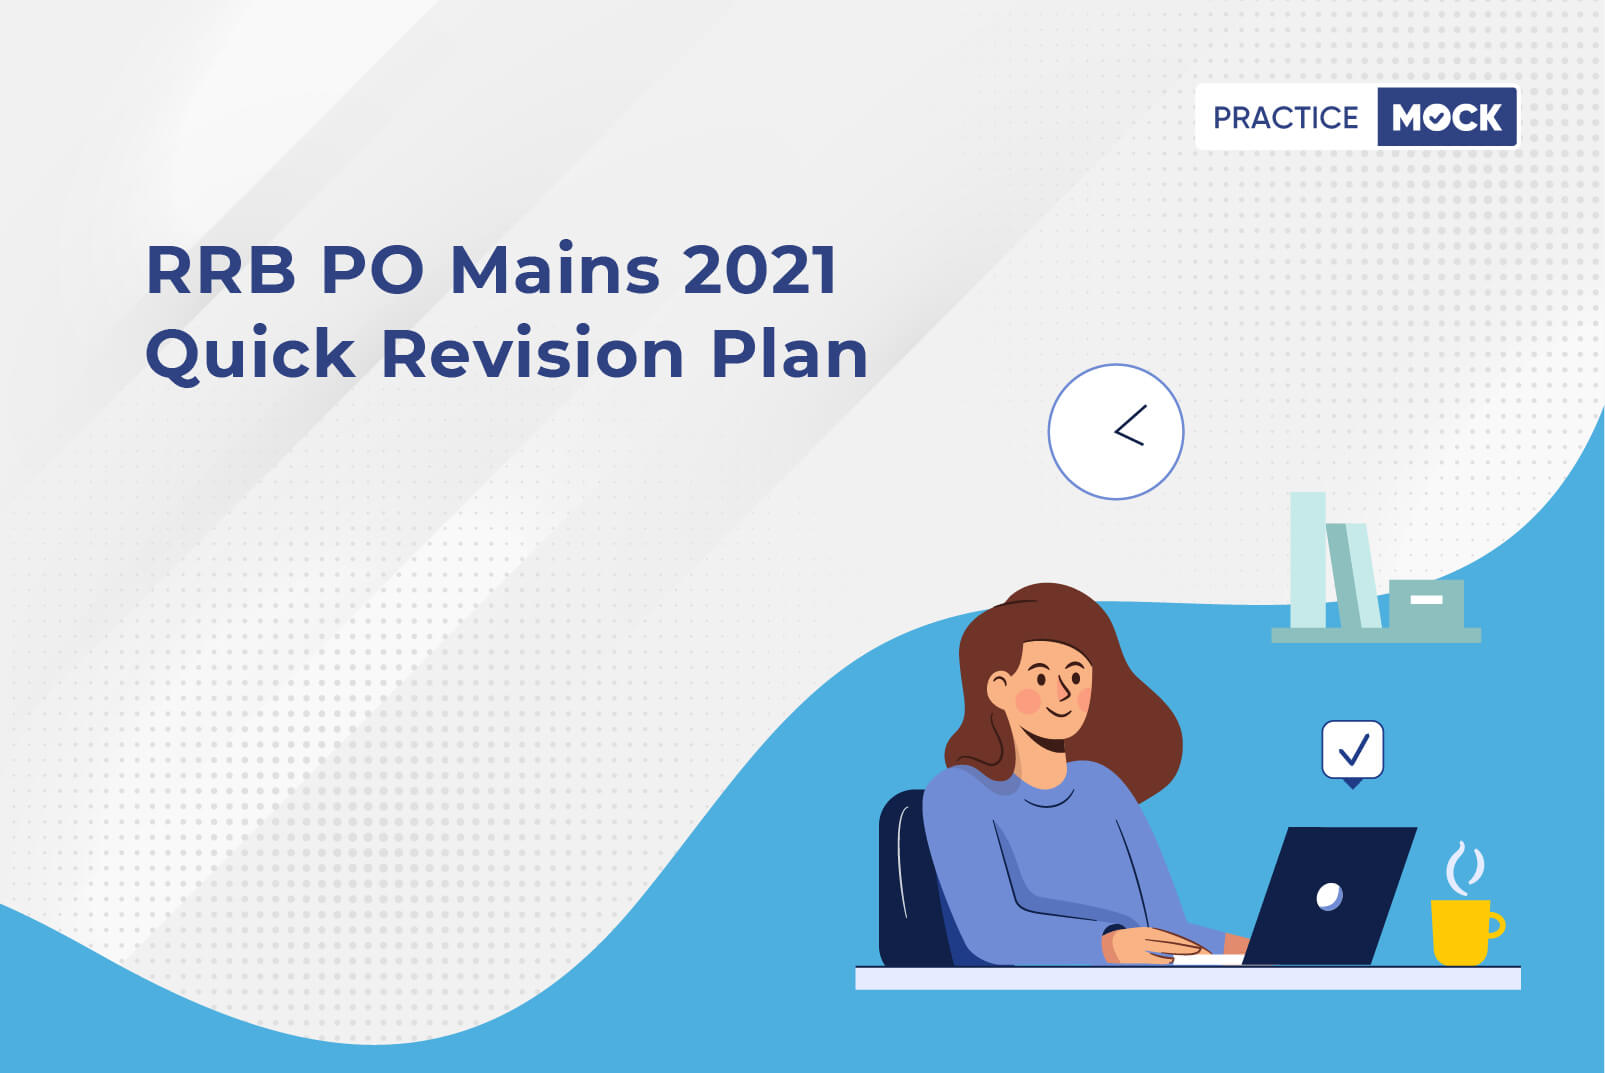 RRB PO mains 2021-Quick Revision Plan